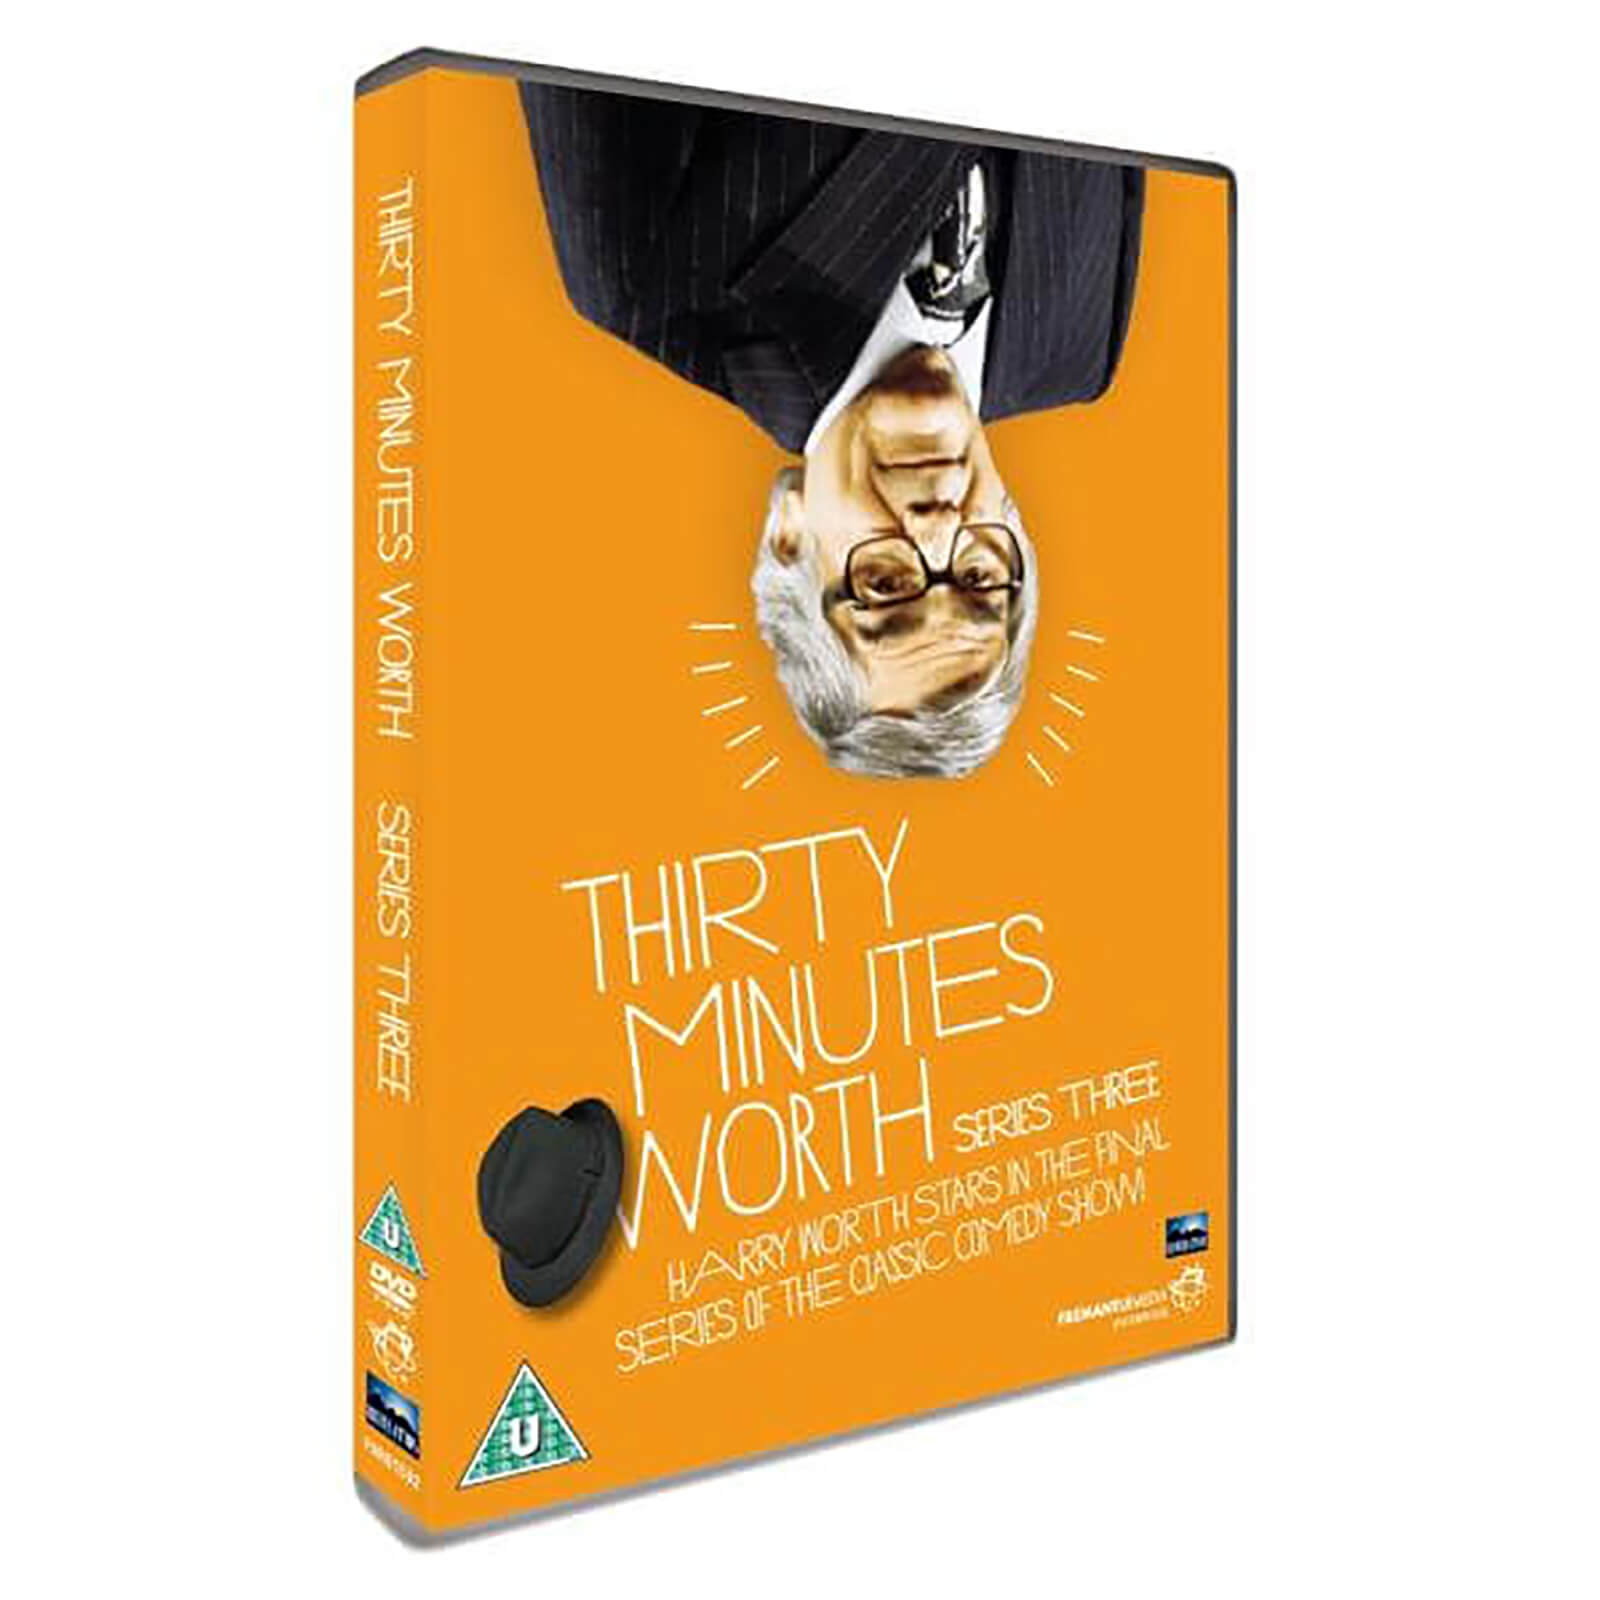 Thirty Minutes Worth a Series Three